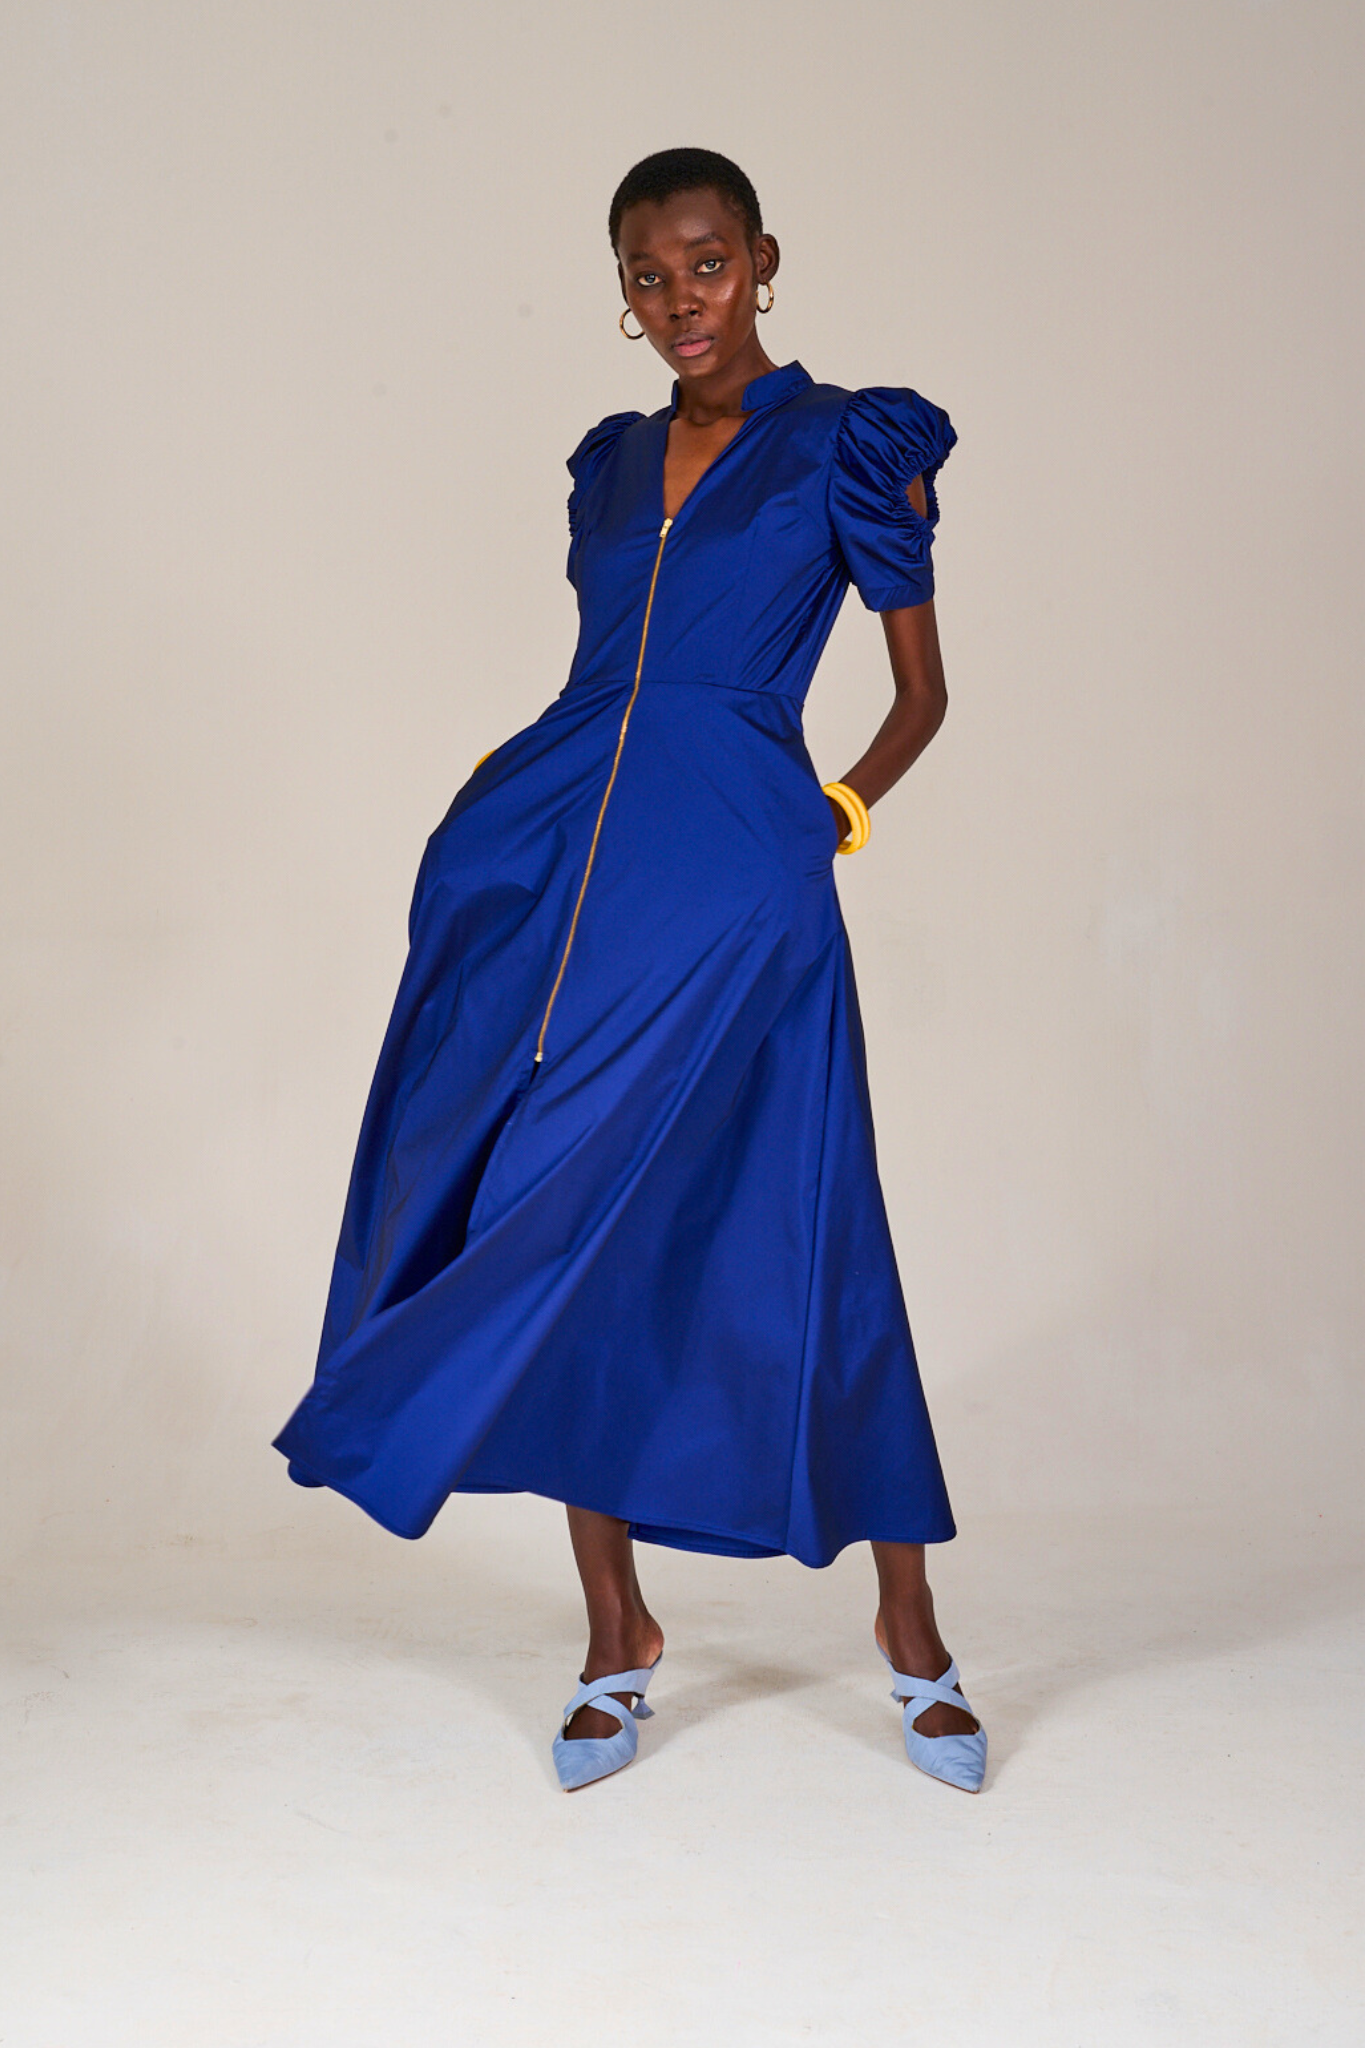 Model posing with hands in pockets of the KAHINDO Nines Blue Dress